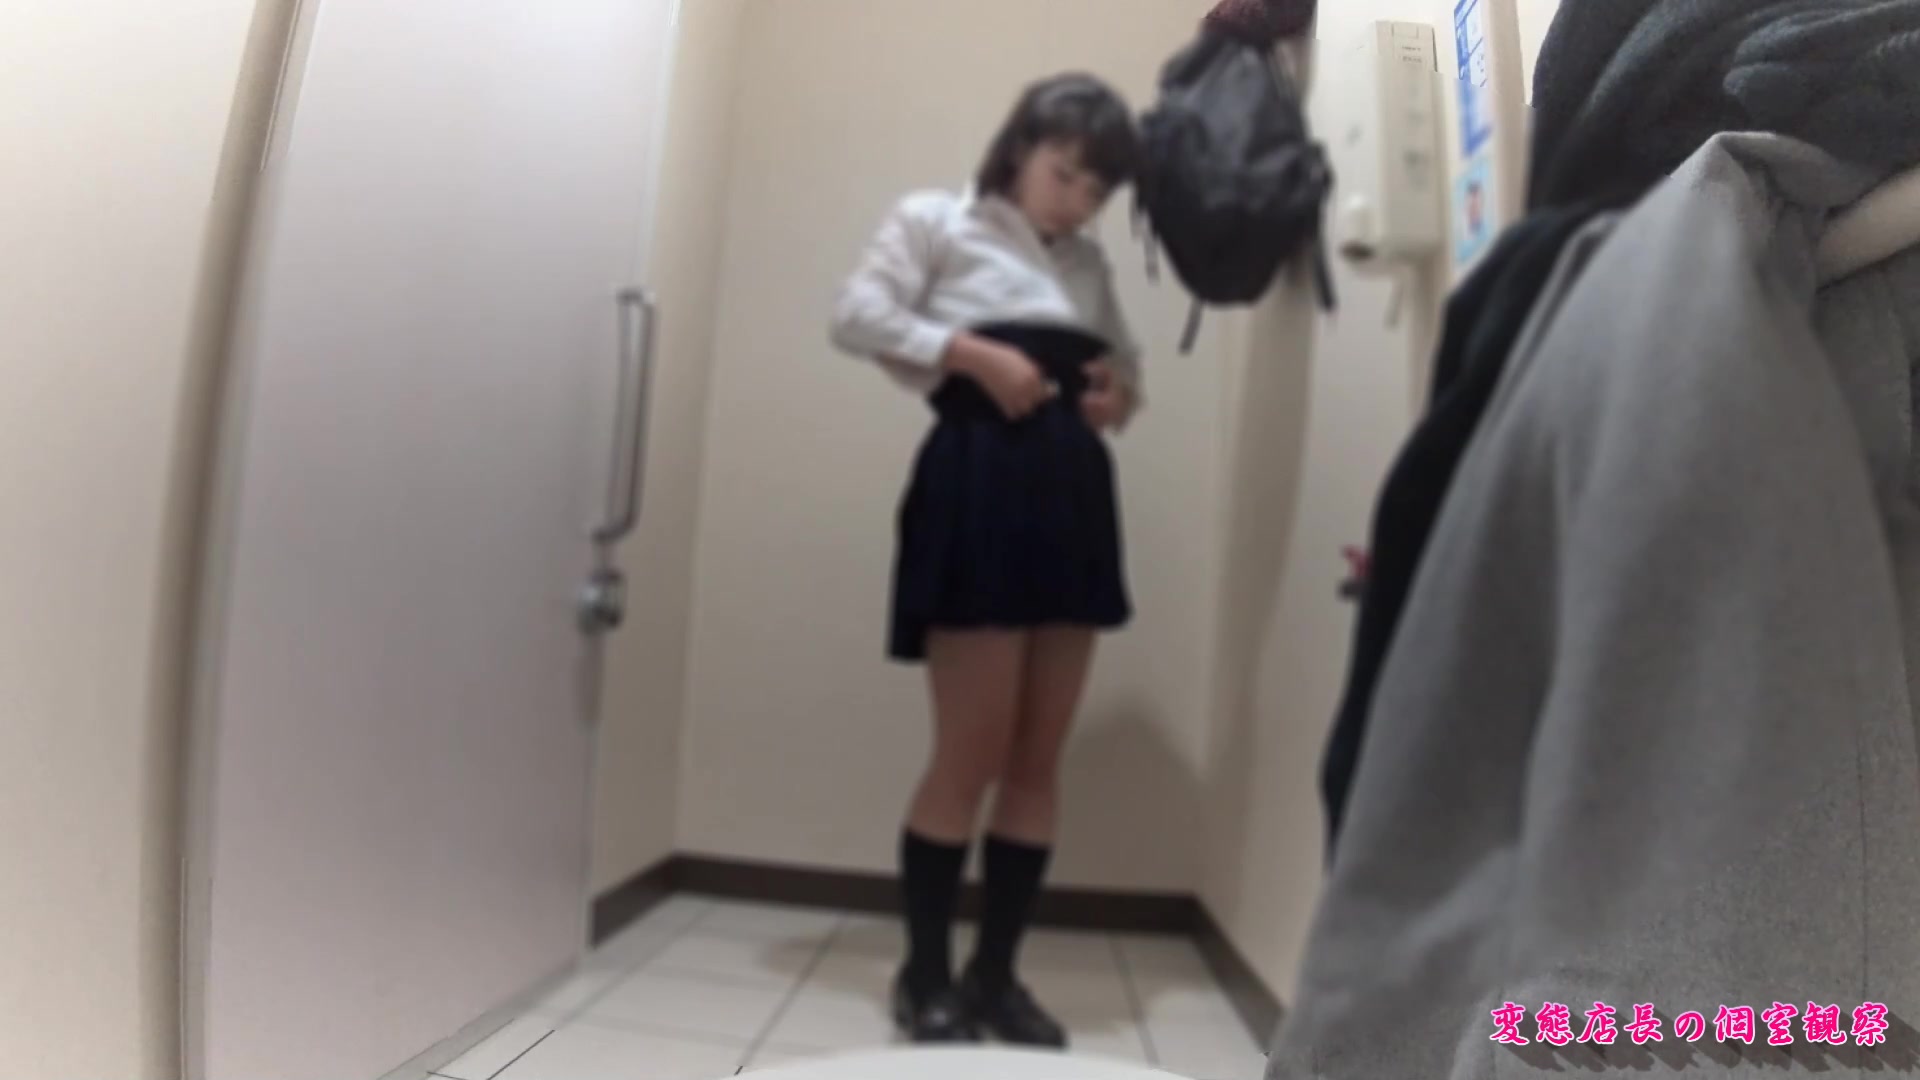 Japanese college student pees and changes clothes